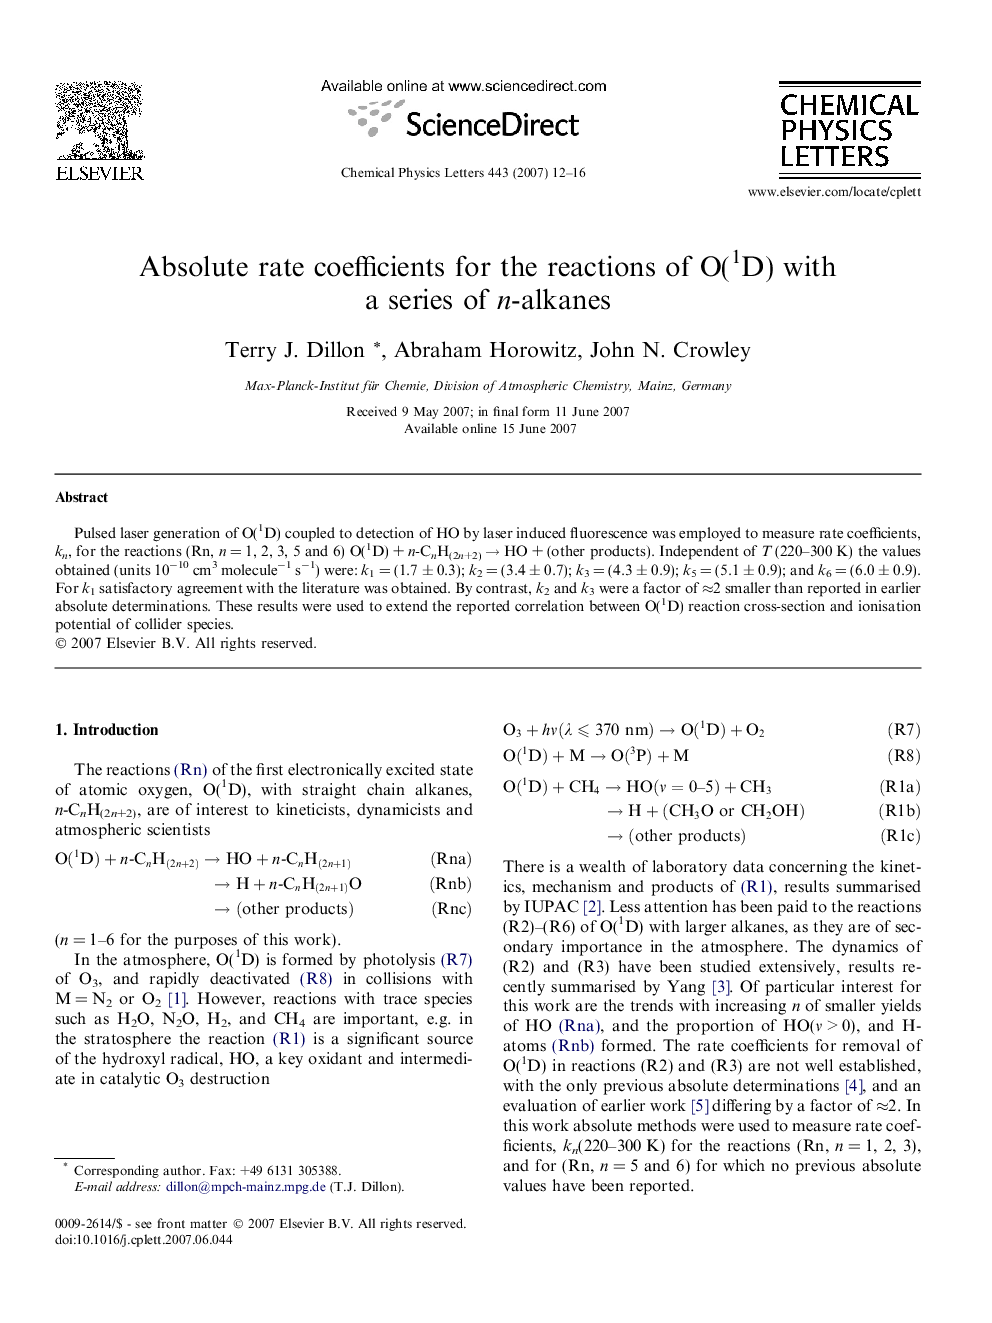 Absolute rate coefficients for the reactions of O(1D) with a series of n-alkanes